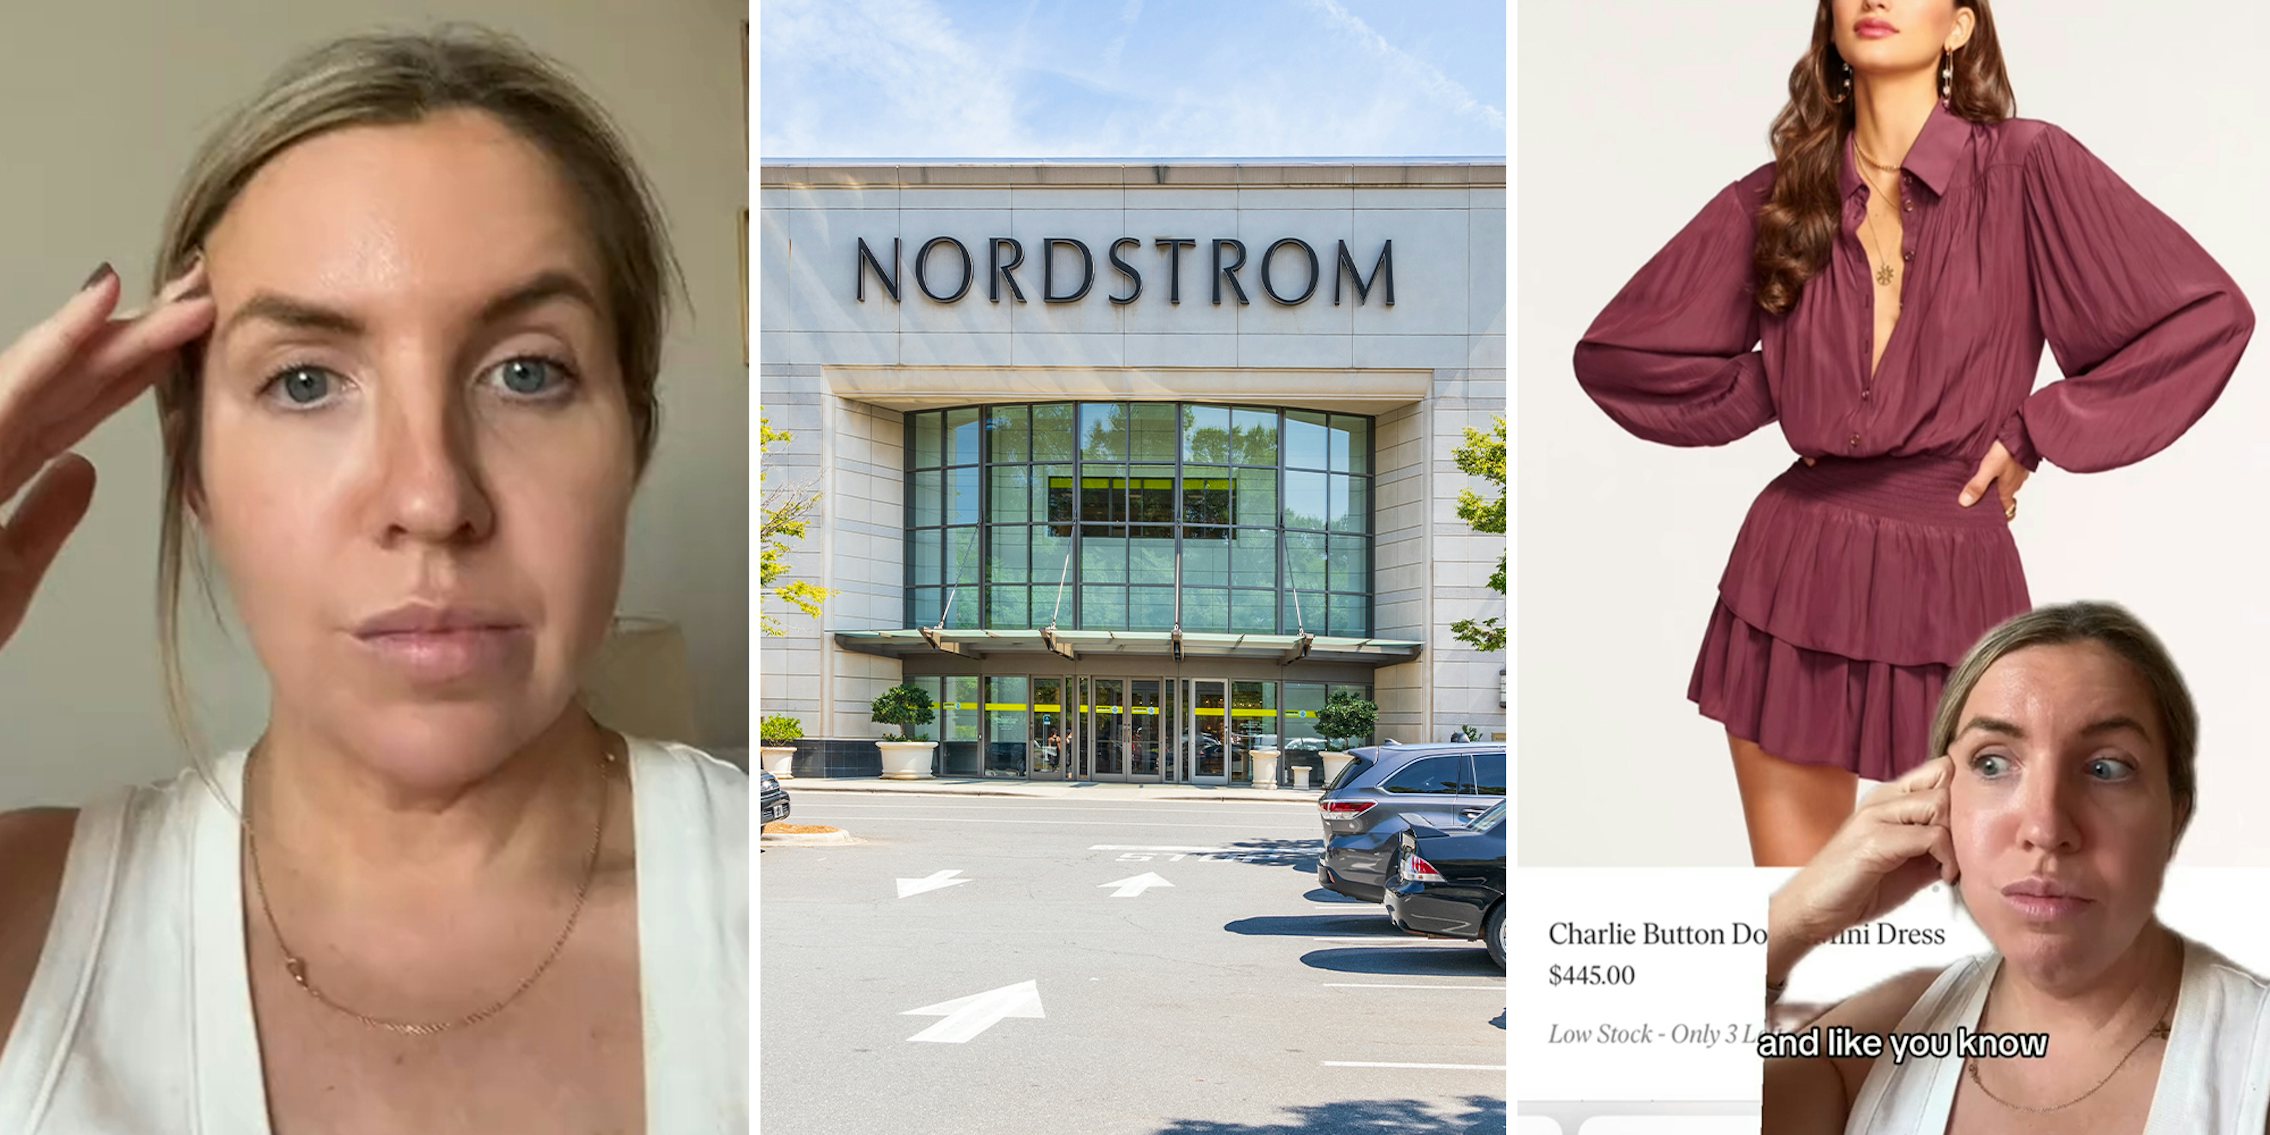 Woman rants about Nordstrom clothes pricing